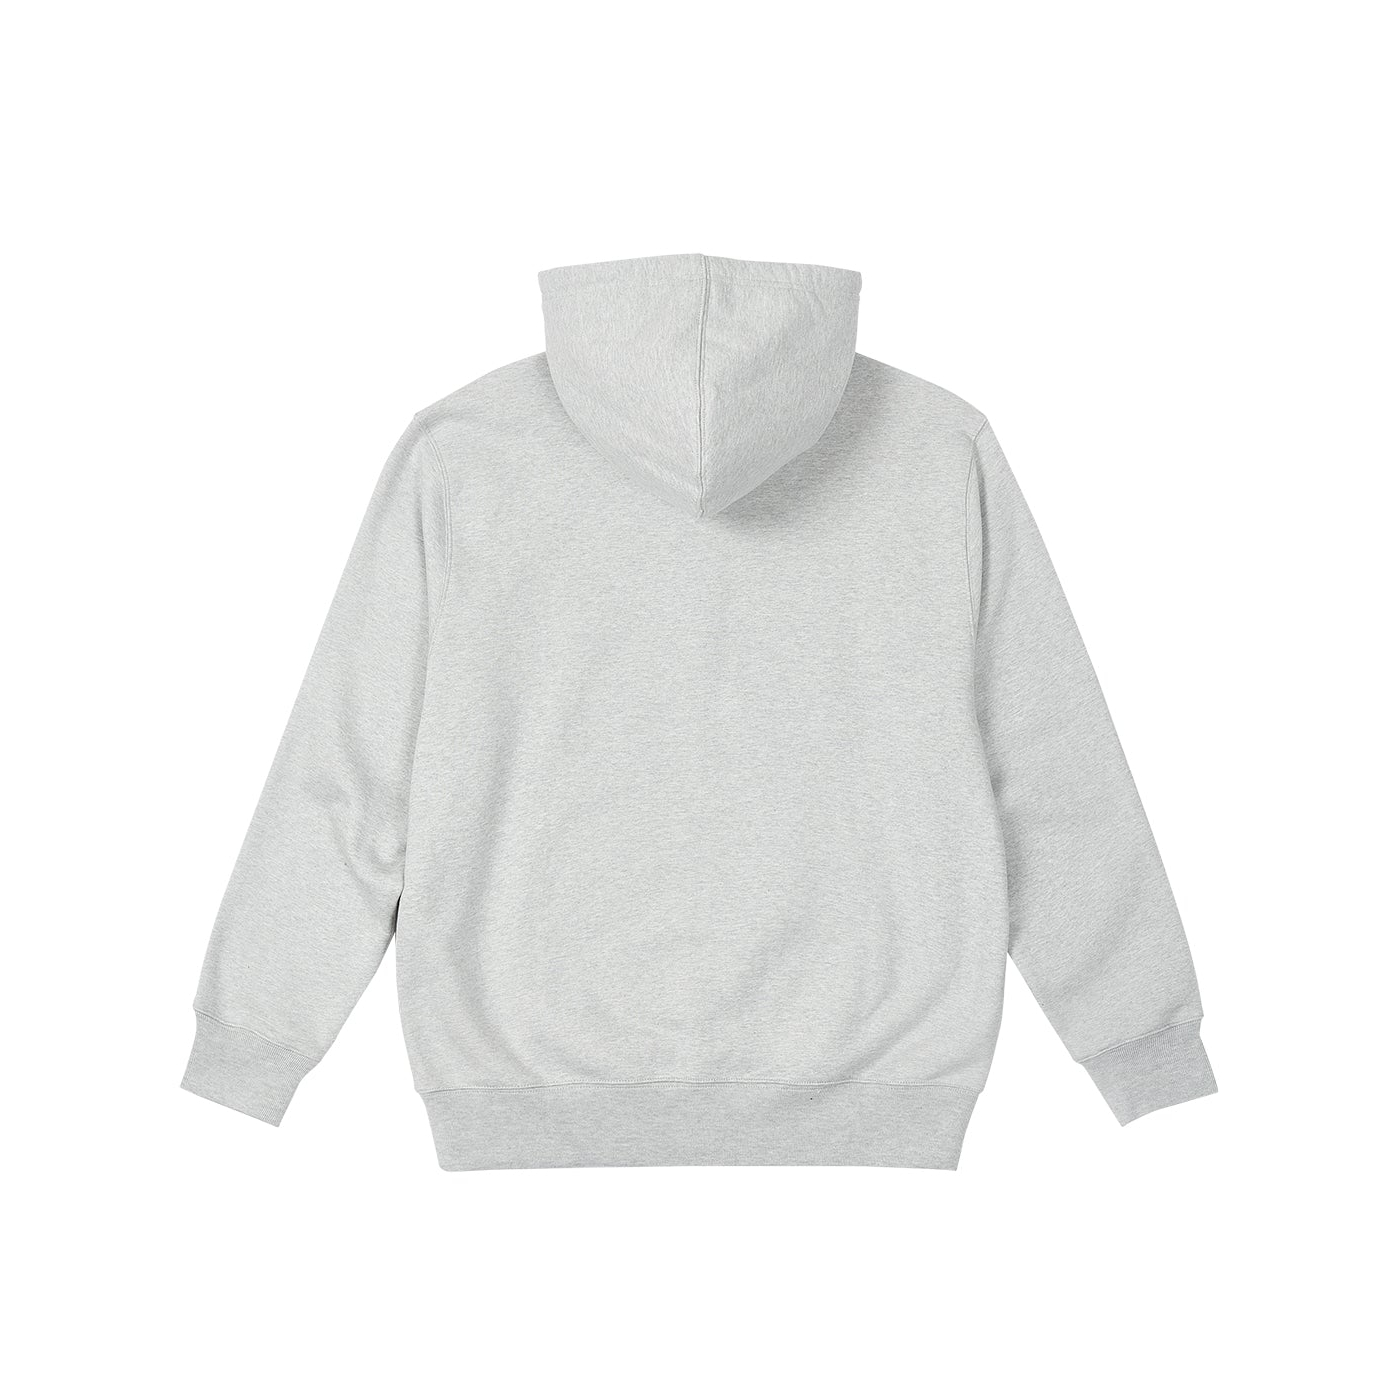 Thumbnail OUTLINE ARCH ZIP HOOD GREY MARL one color